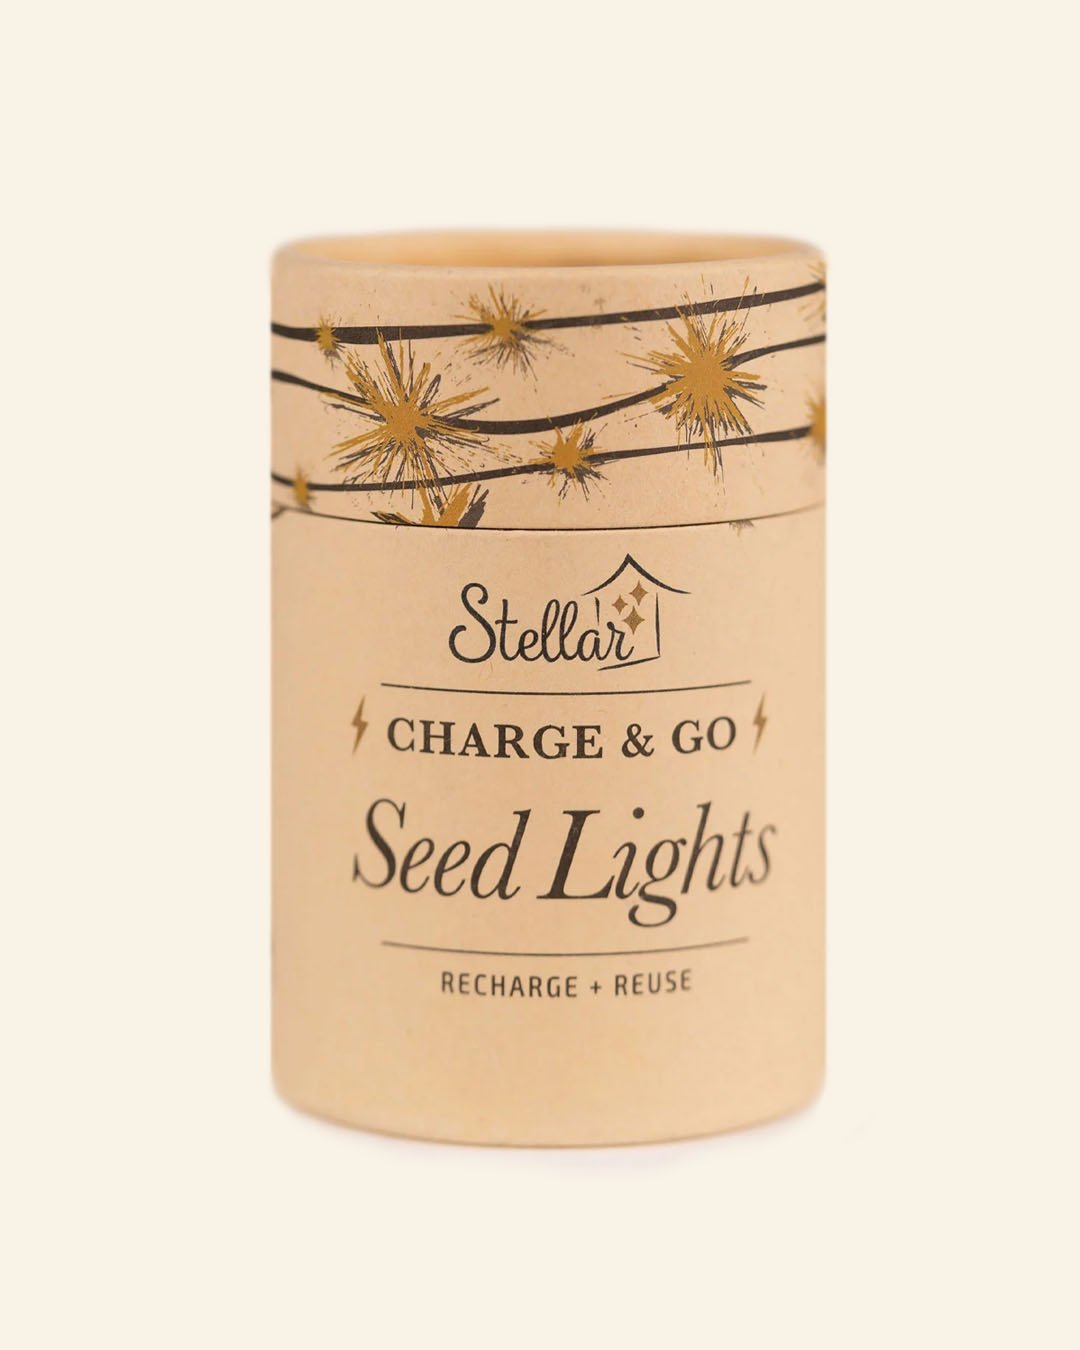 Charge & Go Seed Lights